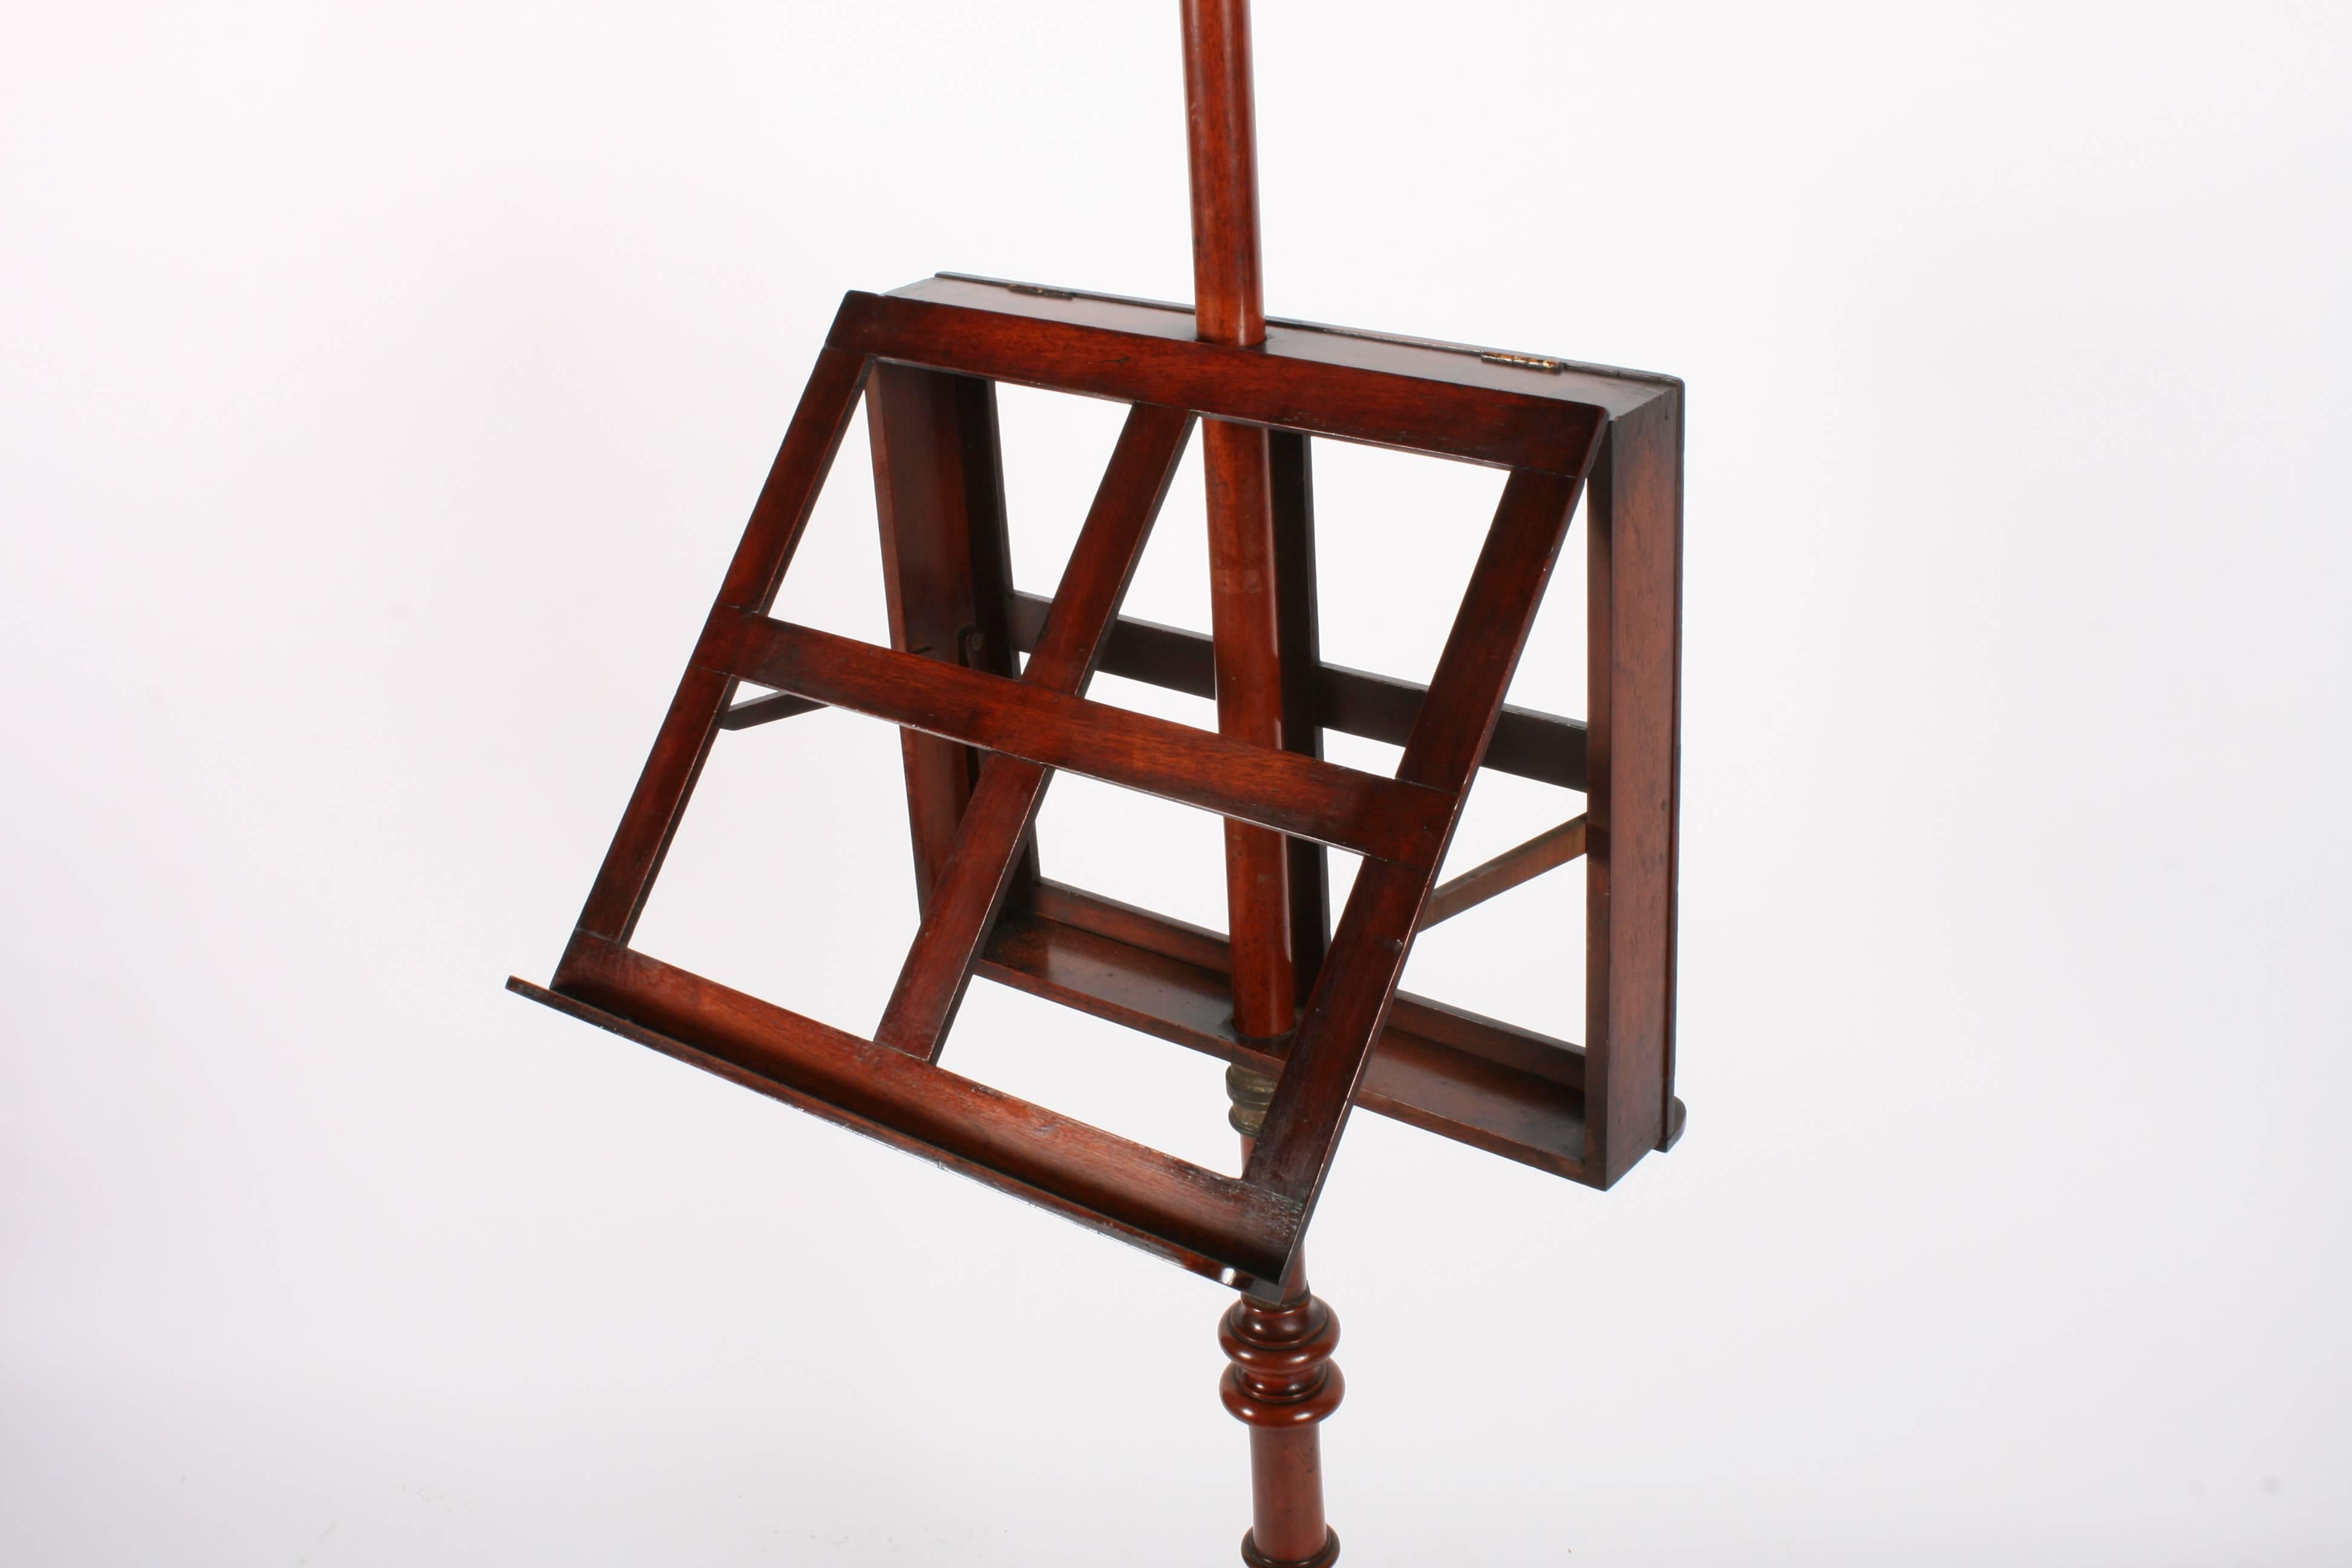 Victorian mahogany duet music stand, circa 1870. With urn shaped top on a large column, there is an adjustable frame with brass collar on mahogany arms. The turned column continues down to a large central block before leading on to cabriole legs on